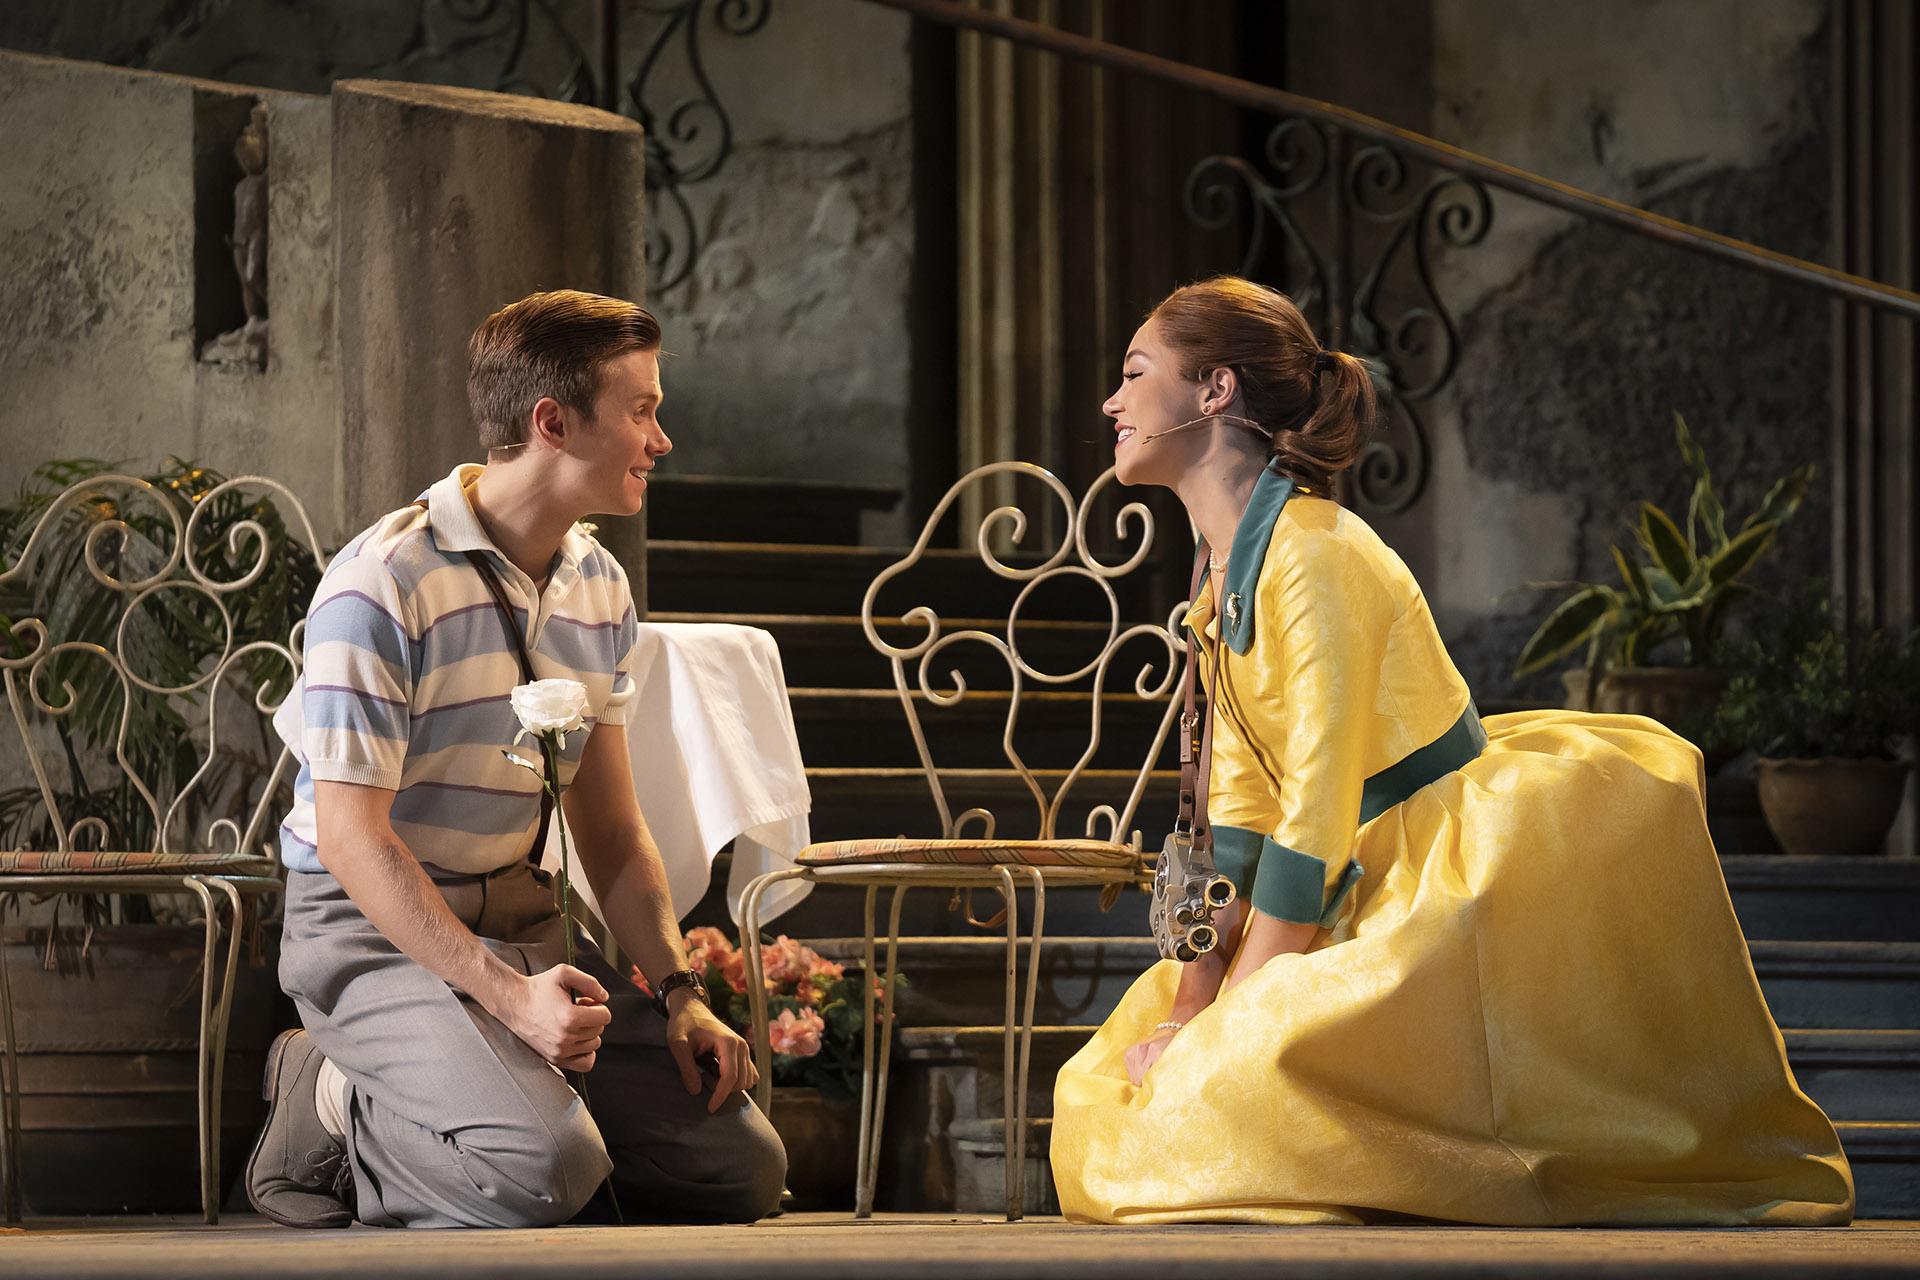 Rob Houchen and Solea Pfeiffer in “The Light in the Piazza" at Lyric Opera House. (Photo by Liz Lauren)